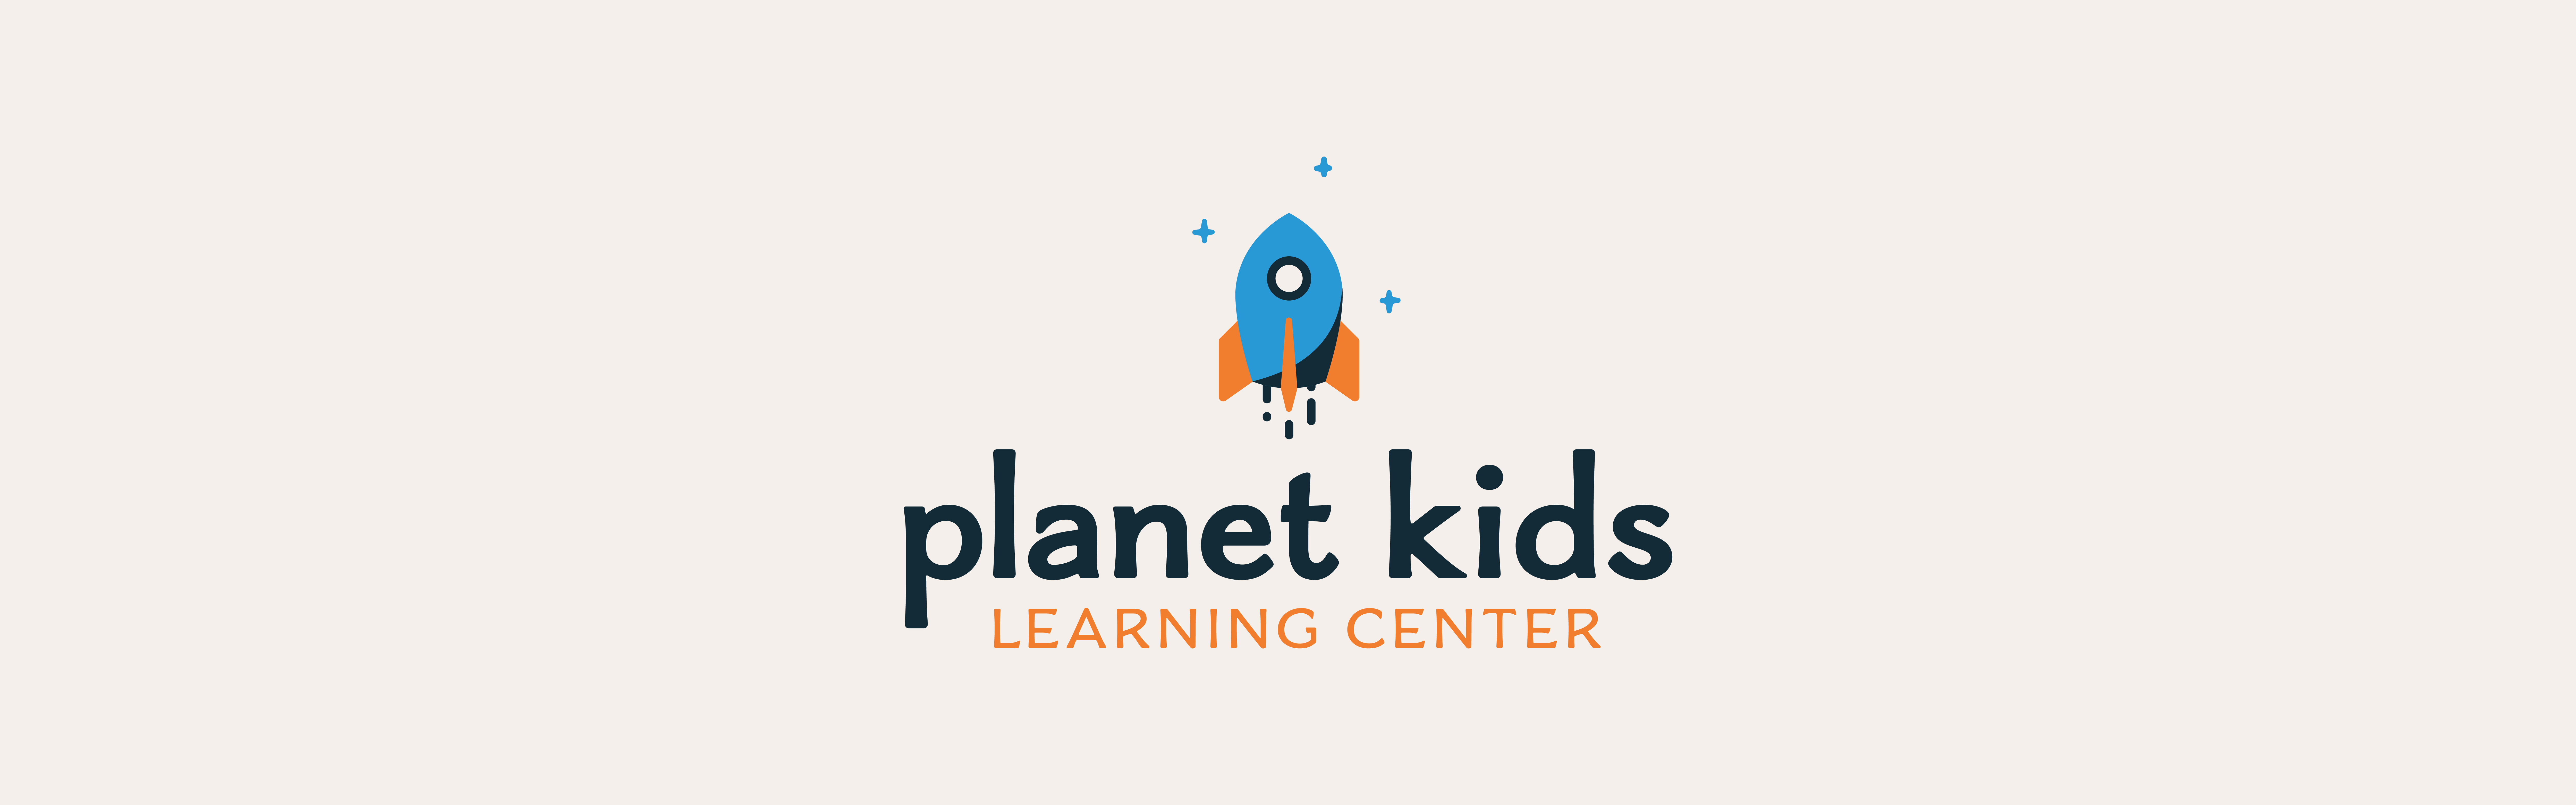 Logo of Planet Kids Learning Center featuring a stylized rocket ship.